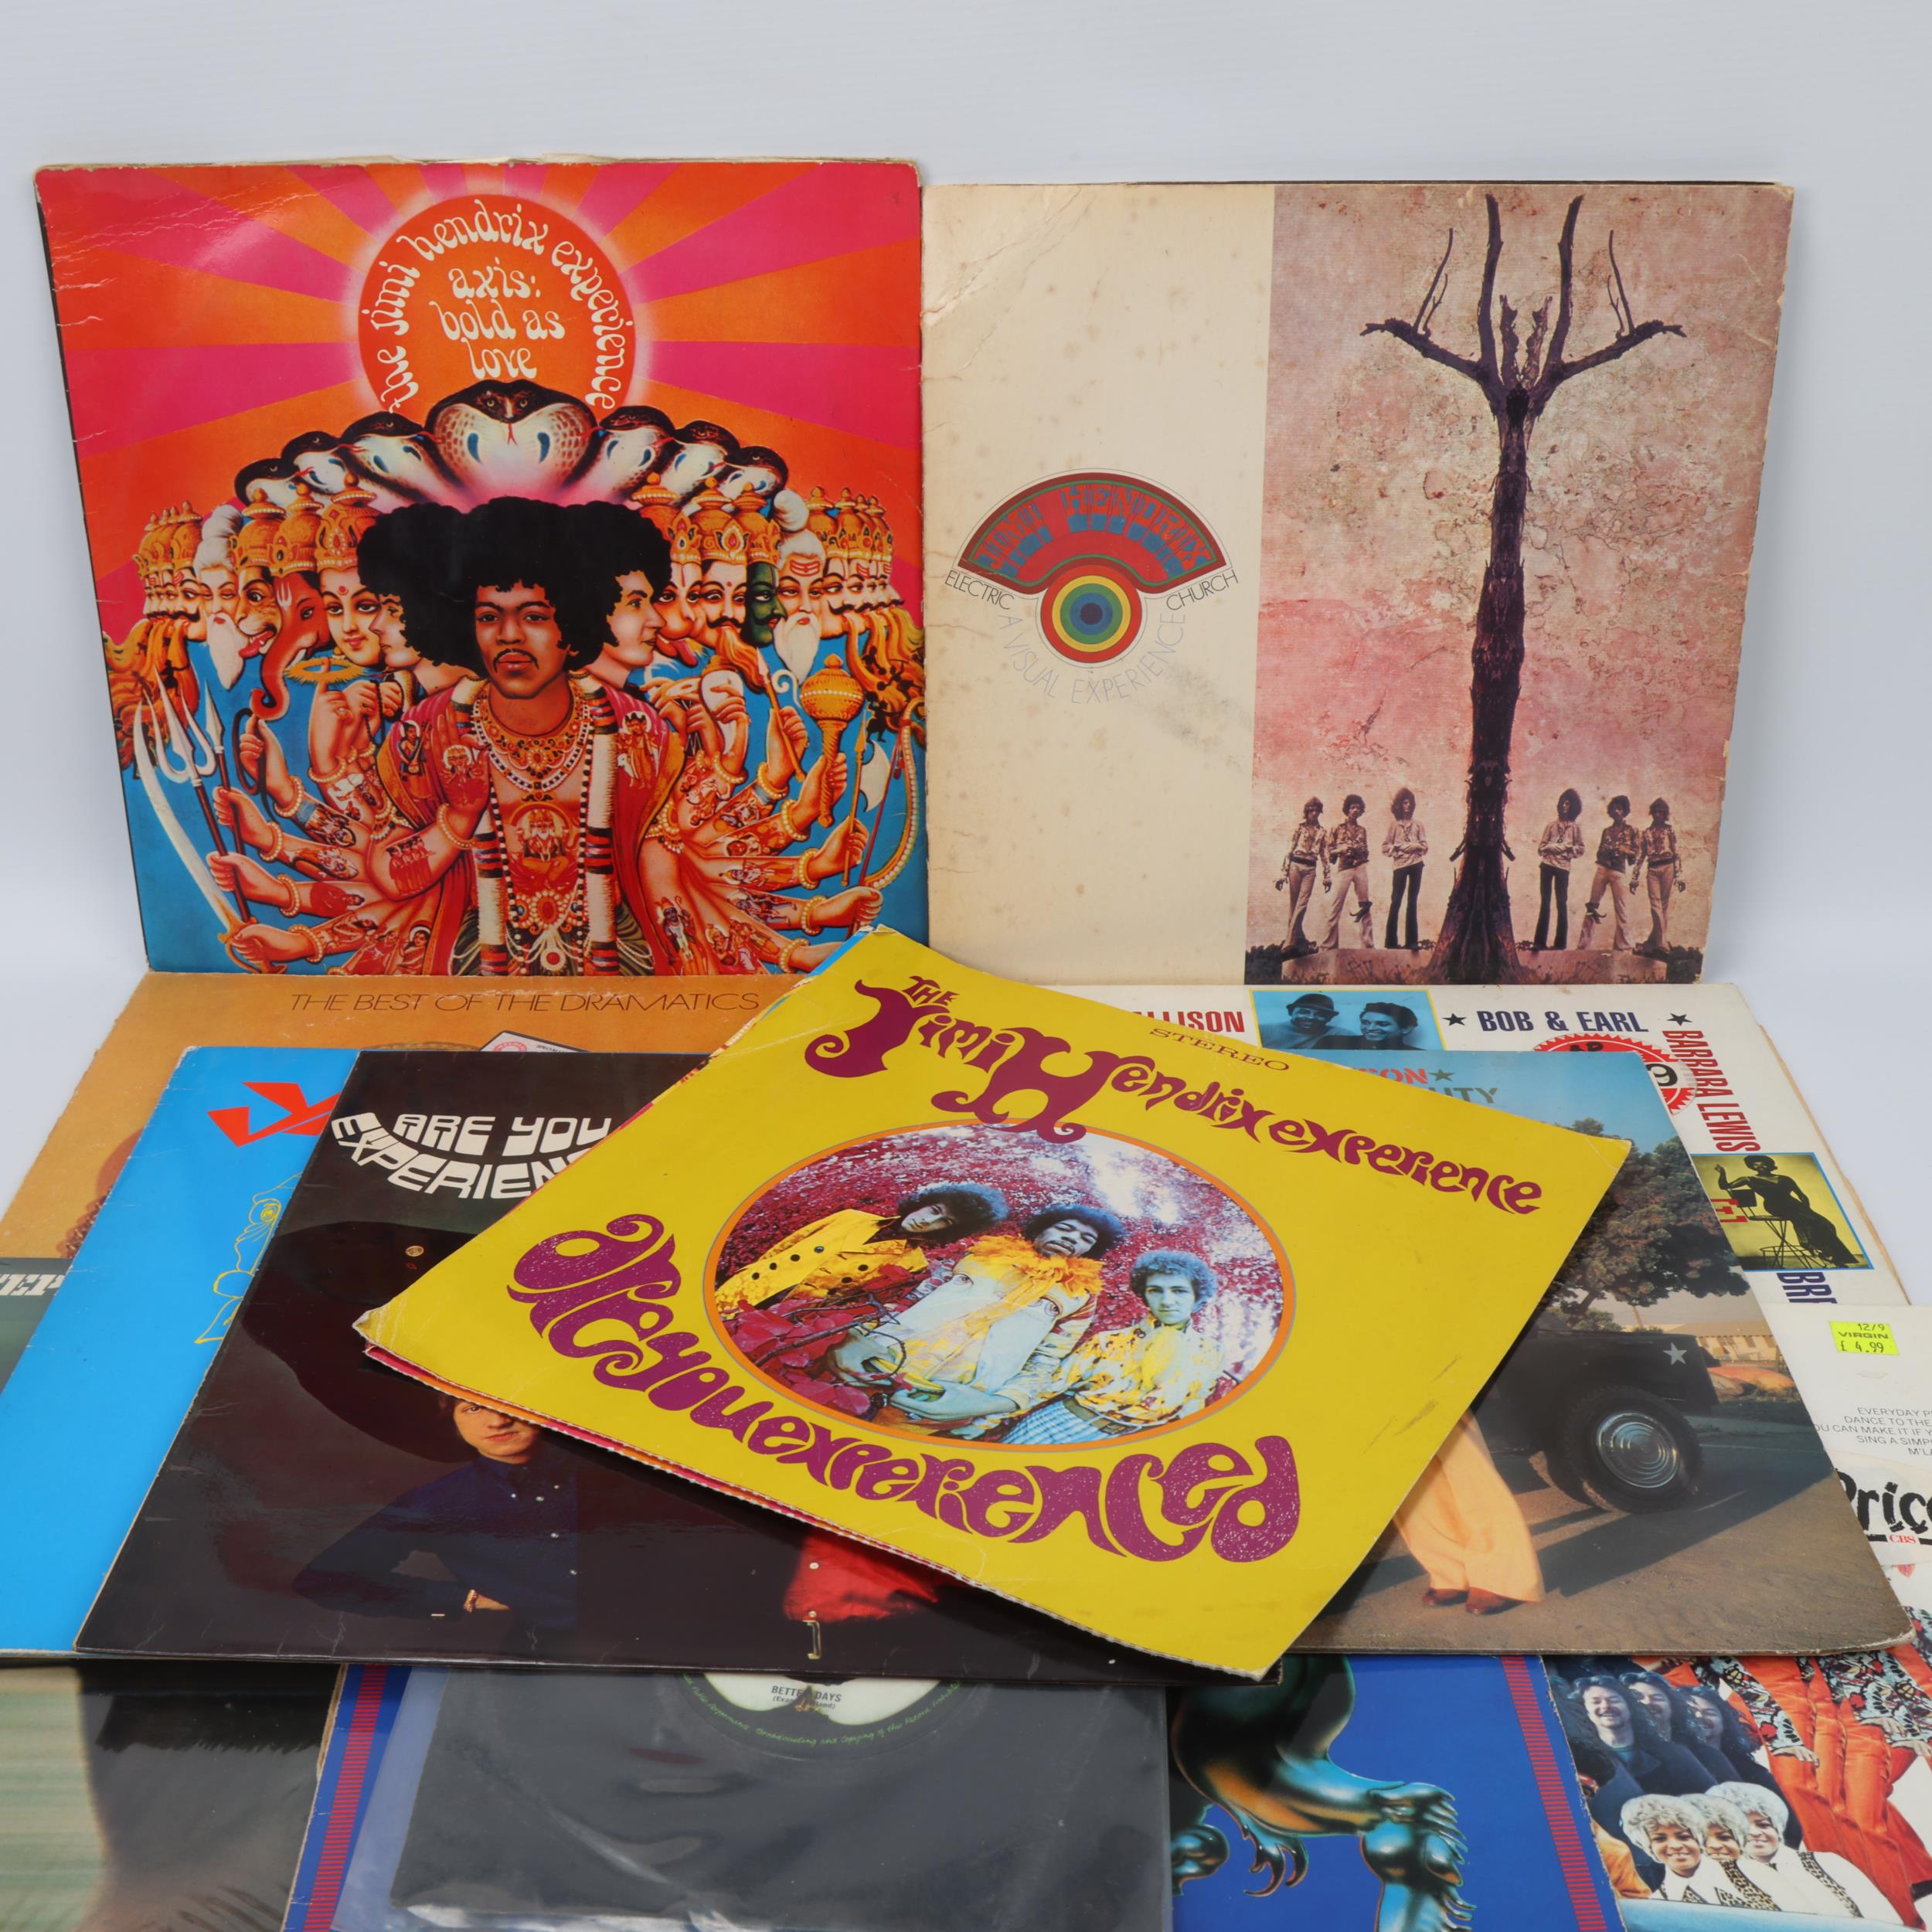 A collection of VINYL LPs owned by MITCH MITCHELL. Titles include: Johnny Guitar Watson 'Funk Beyond - Image 3 of 3